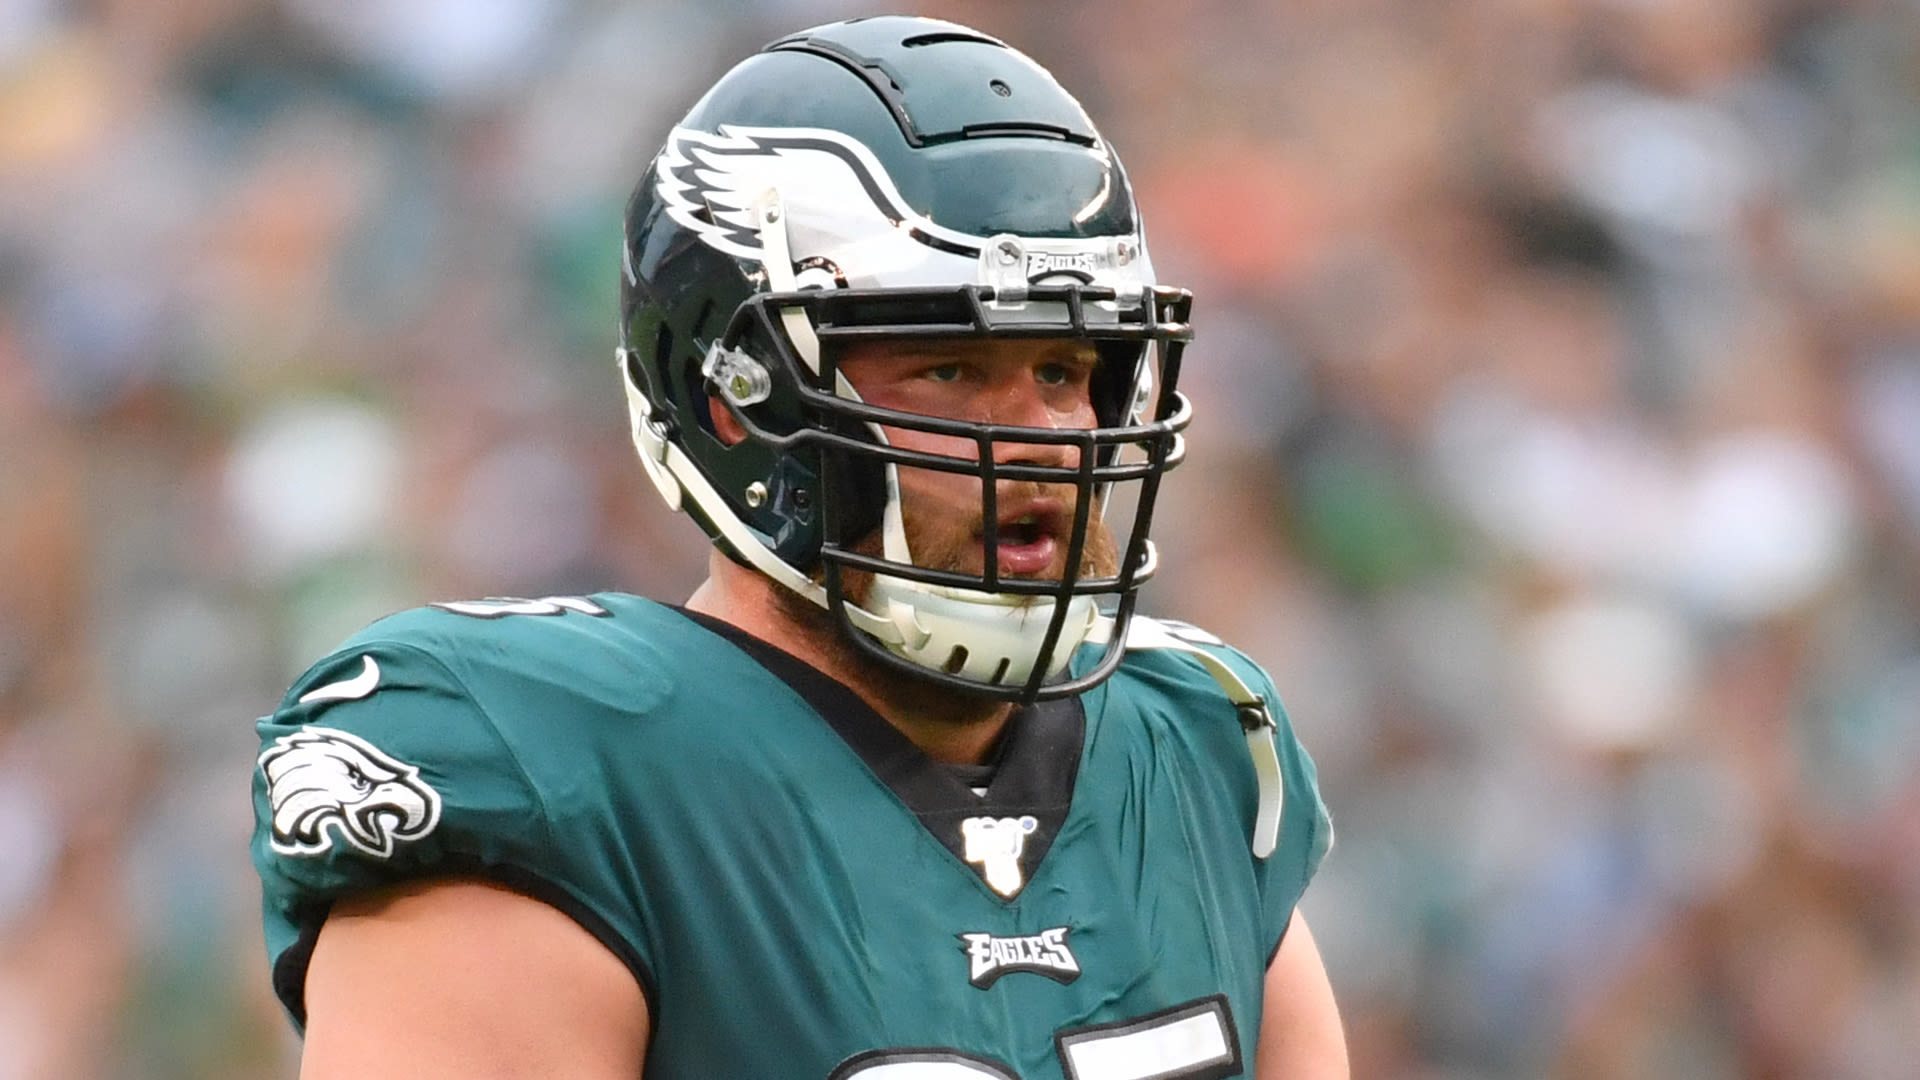 Will he take All-Pro back? Lane Johnson still very important Eagle